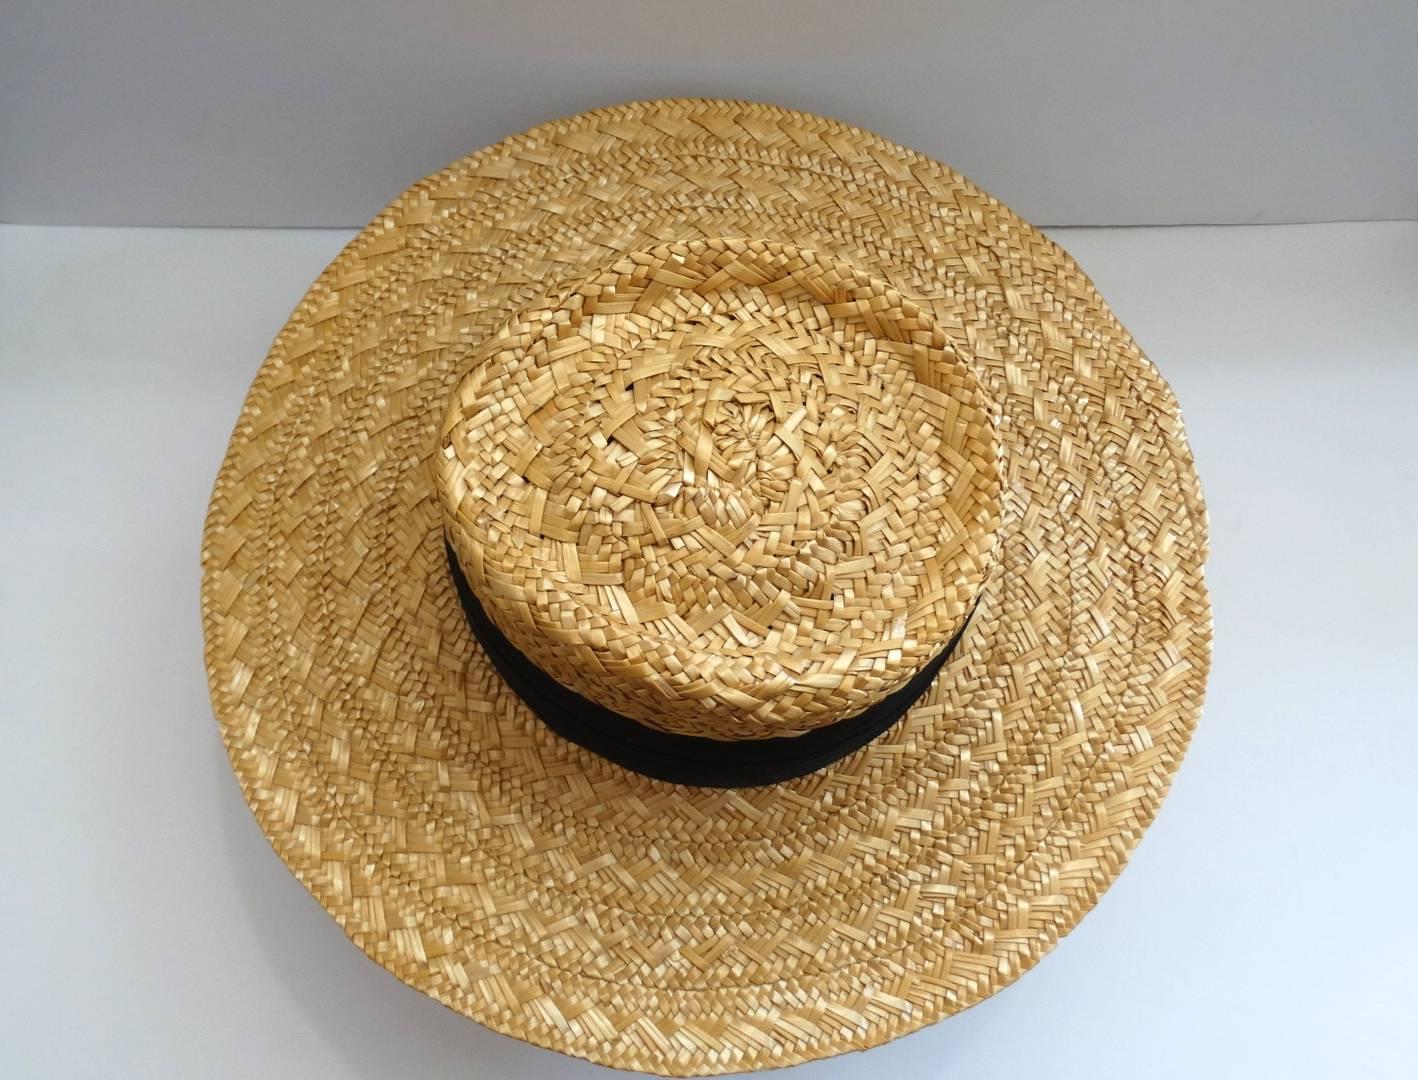 This piece is so classic you'll be reaching for it all summer long- this Eric Javits straw hat is the perfect staple for your cruise wardrobe! Pairs perfectly with a headscarf tied underneath, or on it's own with your favorite cover-up. Made of a